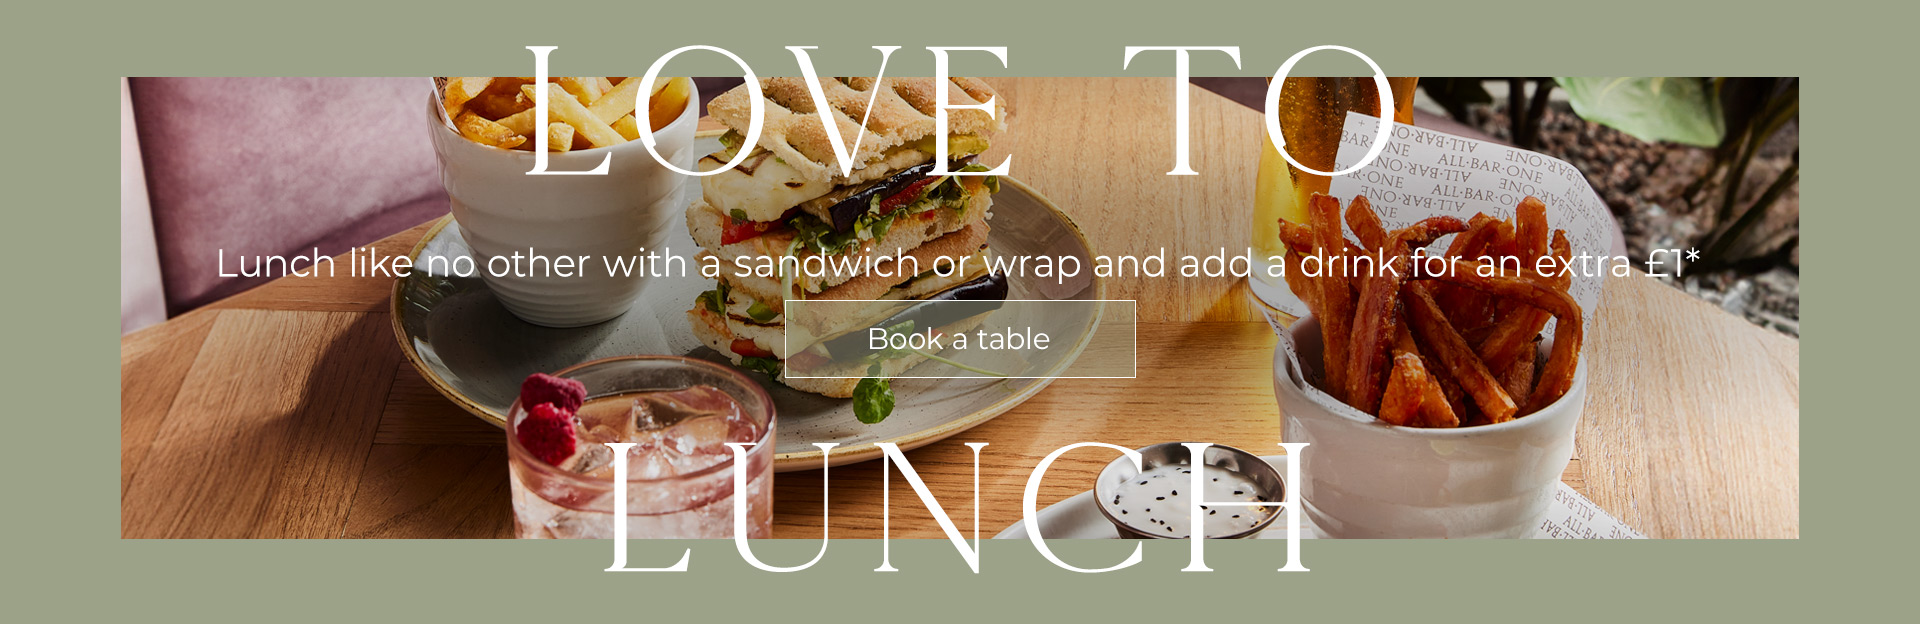 Lunch Offer at All Bar One Waterloo